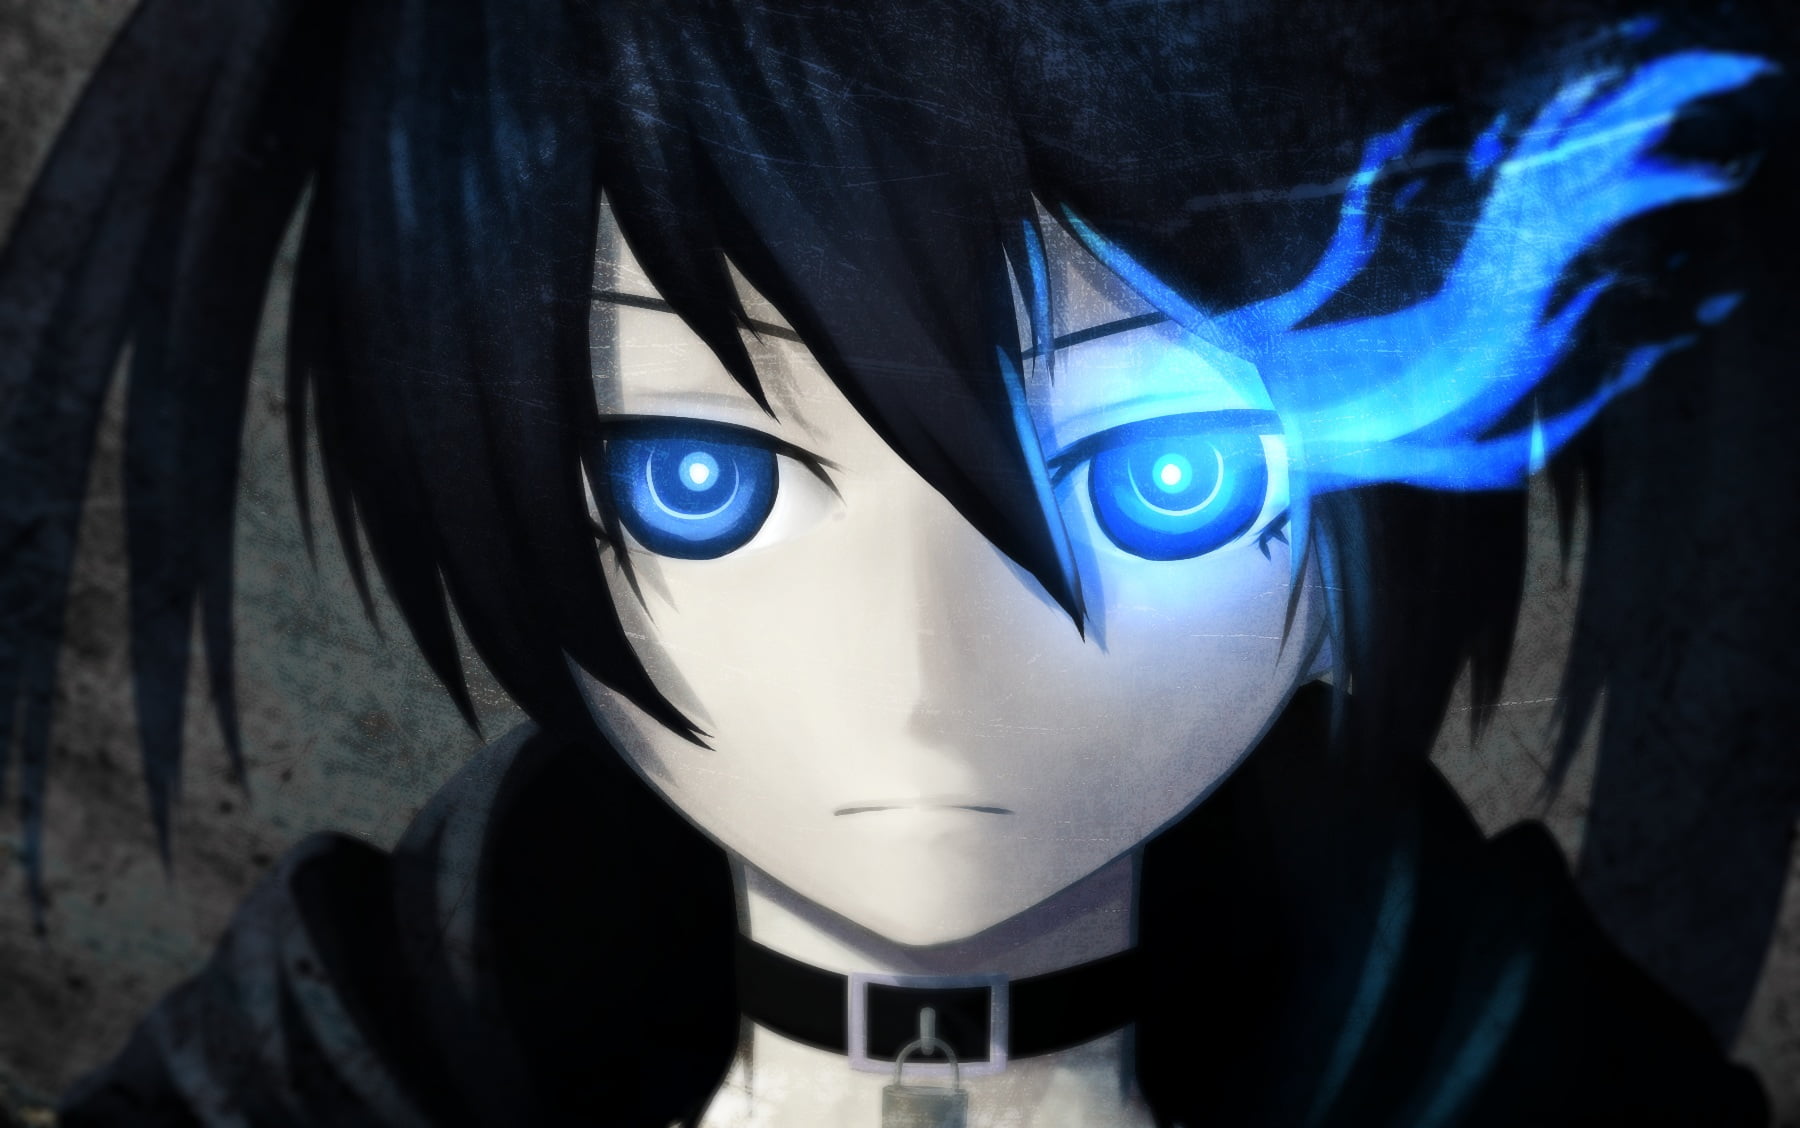 2. "Masked and Dangerous: The Blue Hair and Glowing Eyes Game" - wide 9